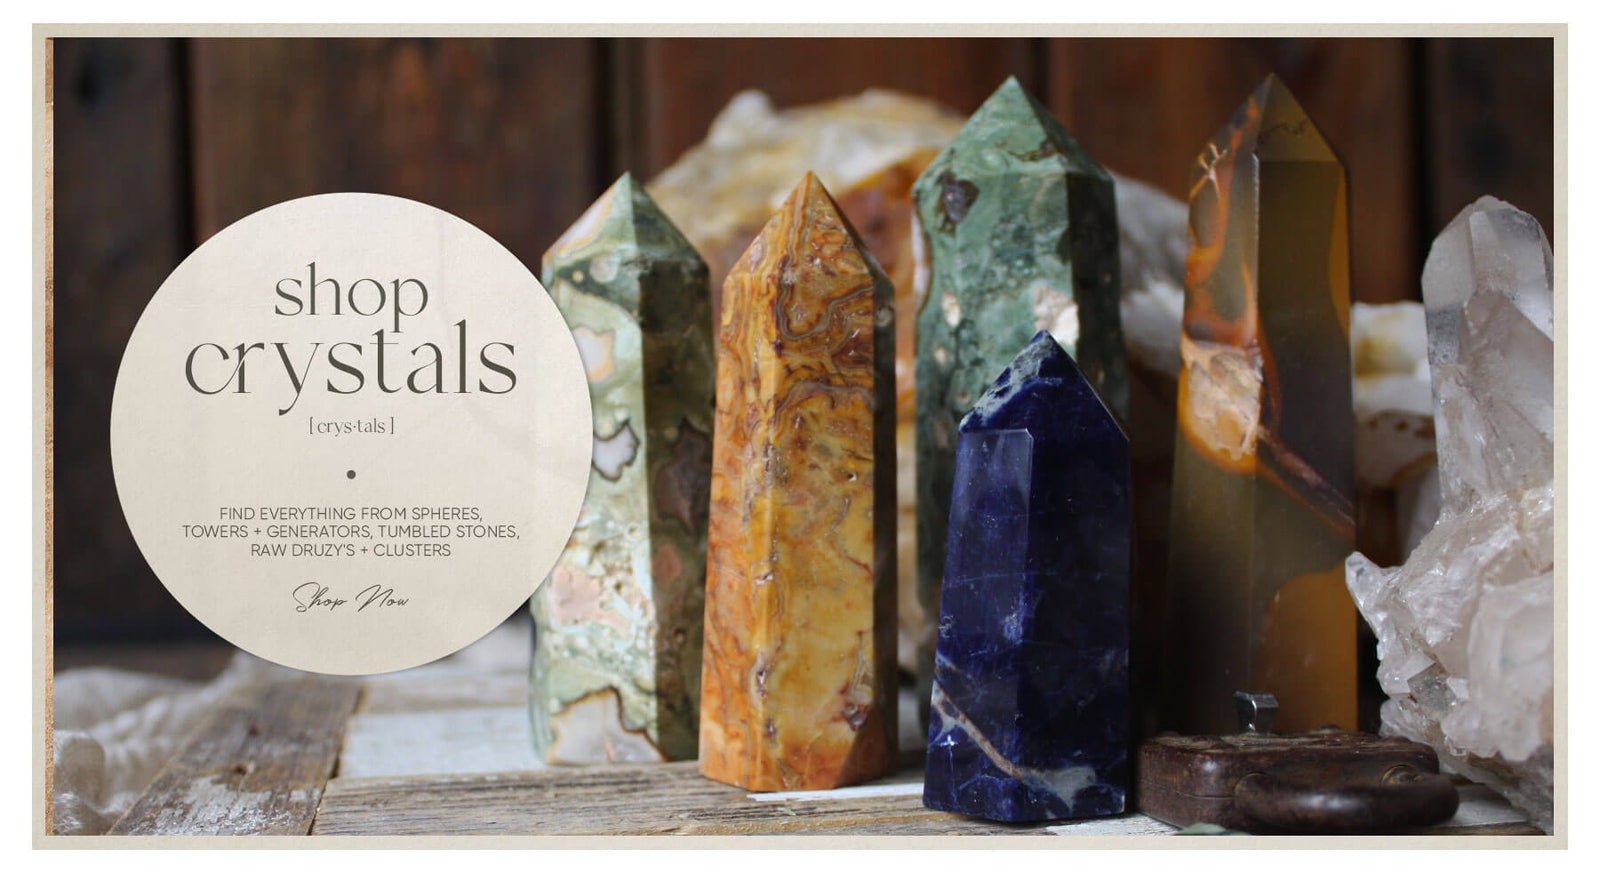 Metaphysical Store Near Me - The #1 Healing Crystal Shop Near Me